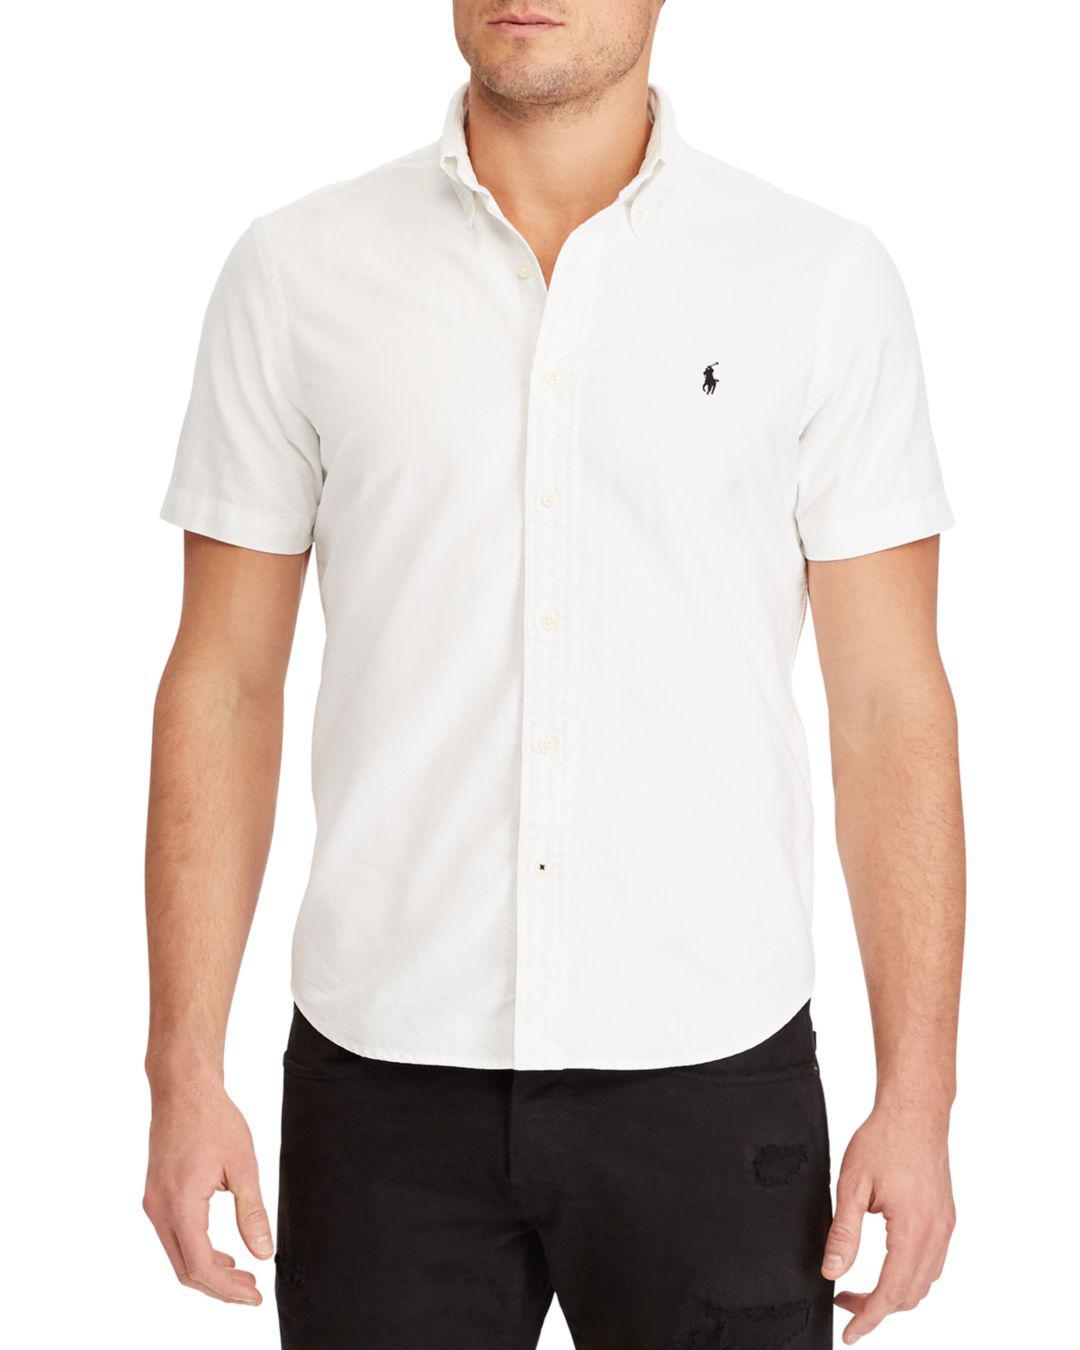 Lyst - Polo Ralph Lauren Cotton Classic Fit Button-down Shirt in White ...